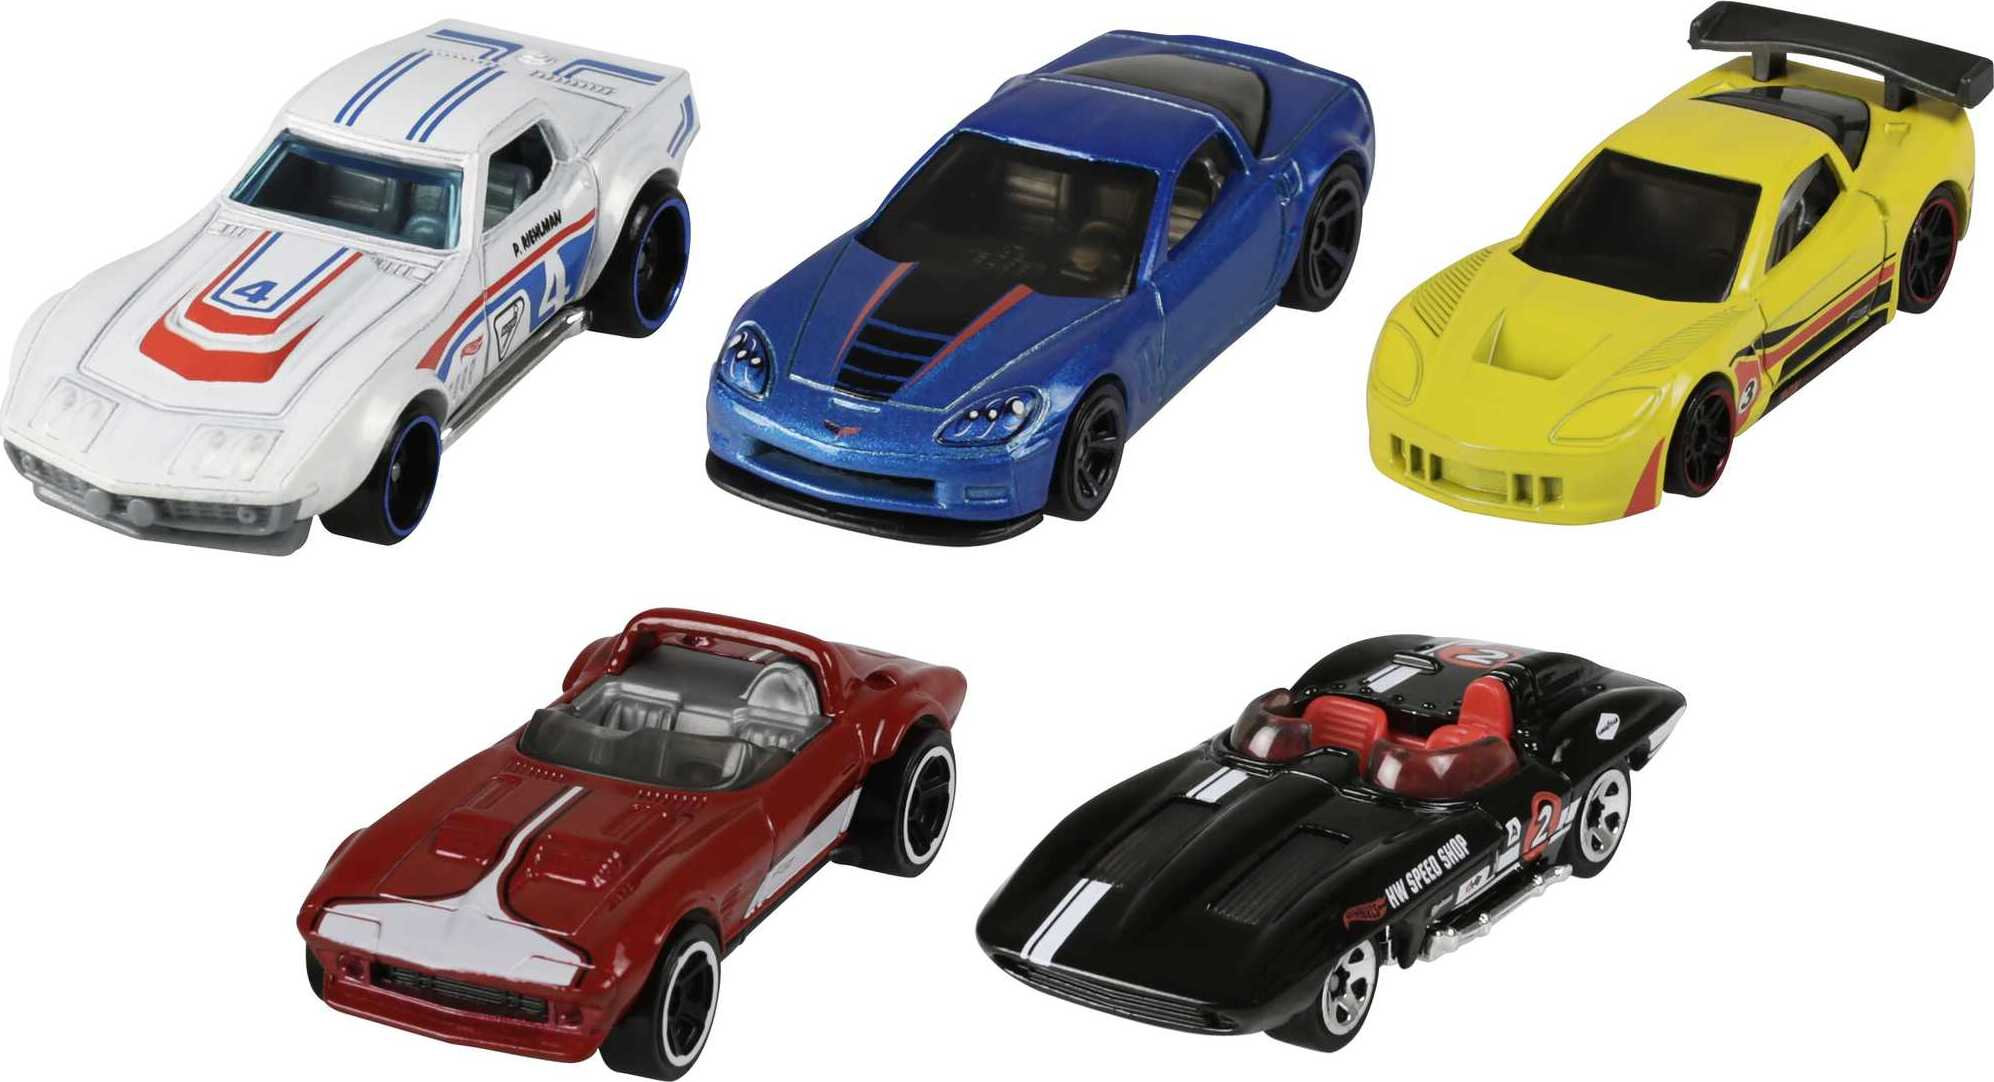 Hot Wheels Cars, 5-Pack of Die-Cast Toy Cars or Trucks in 1:64 Scale (Styles May Vary) - image 5 of 7